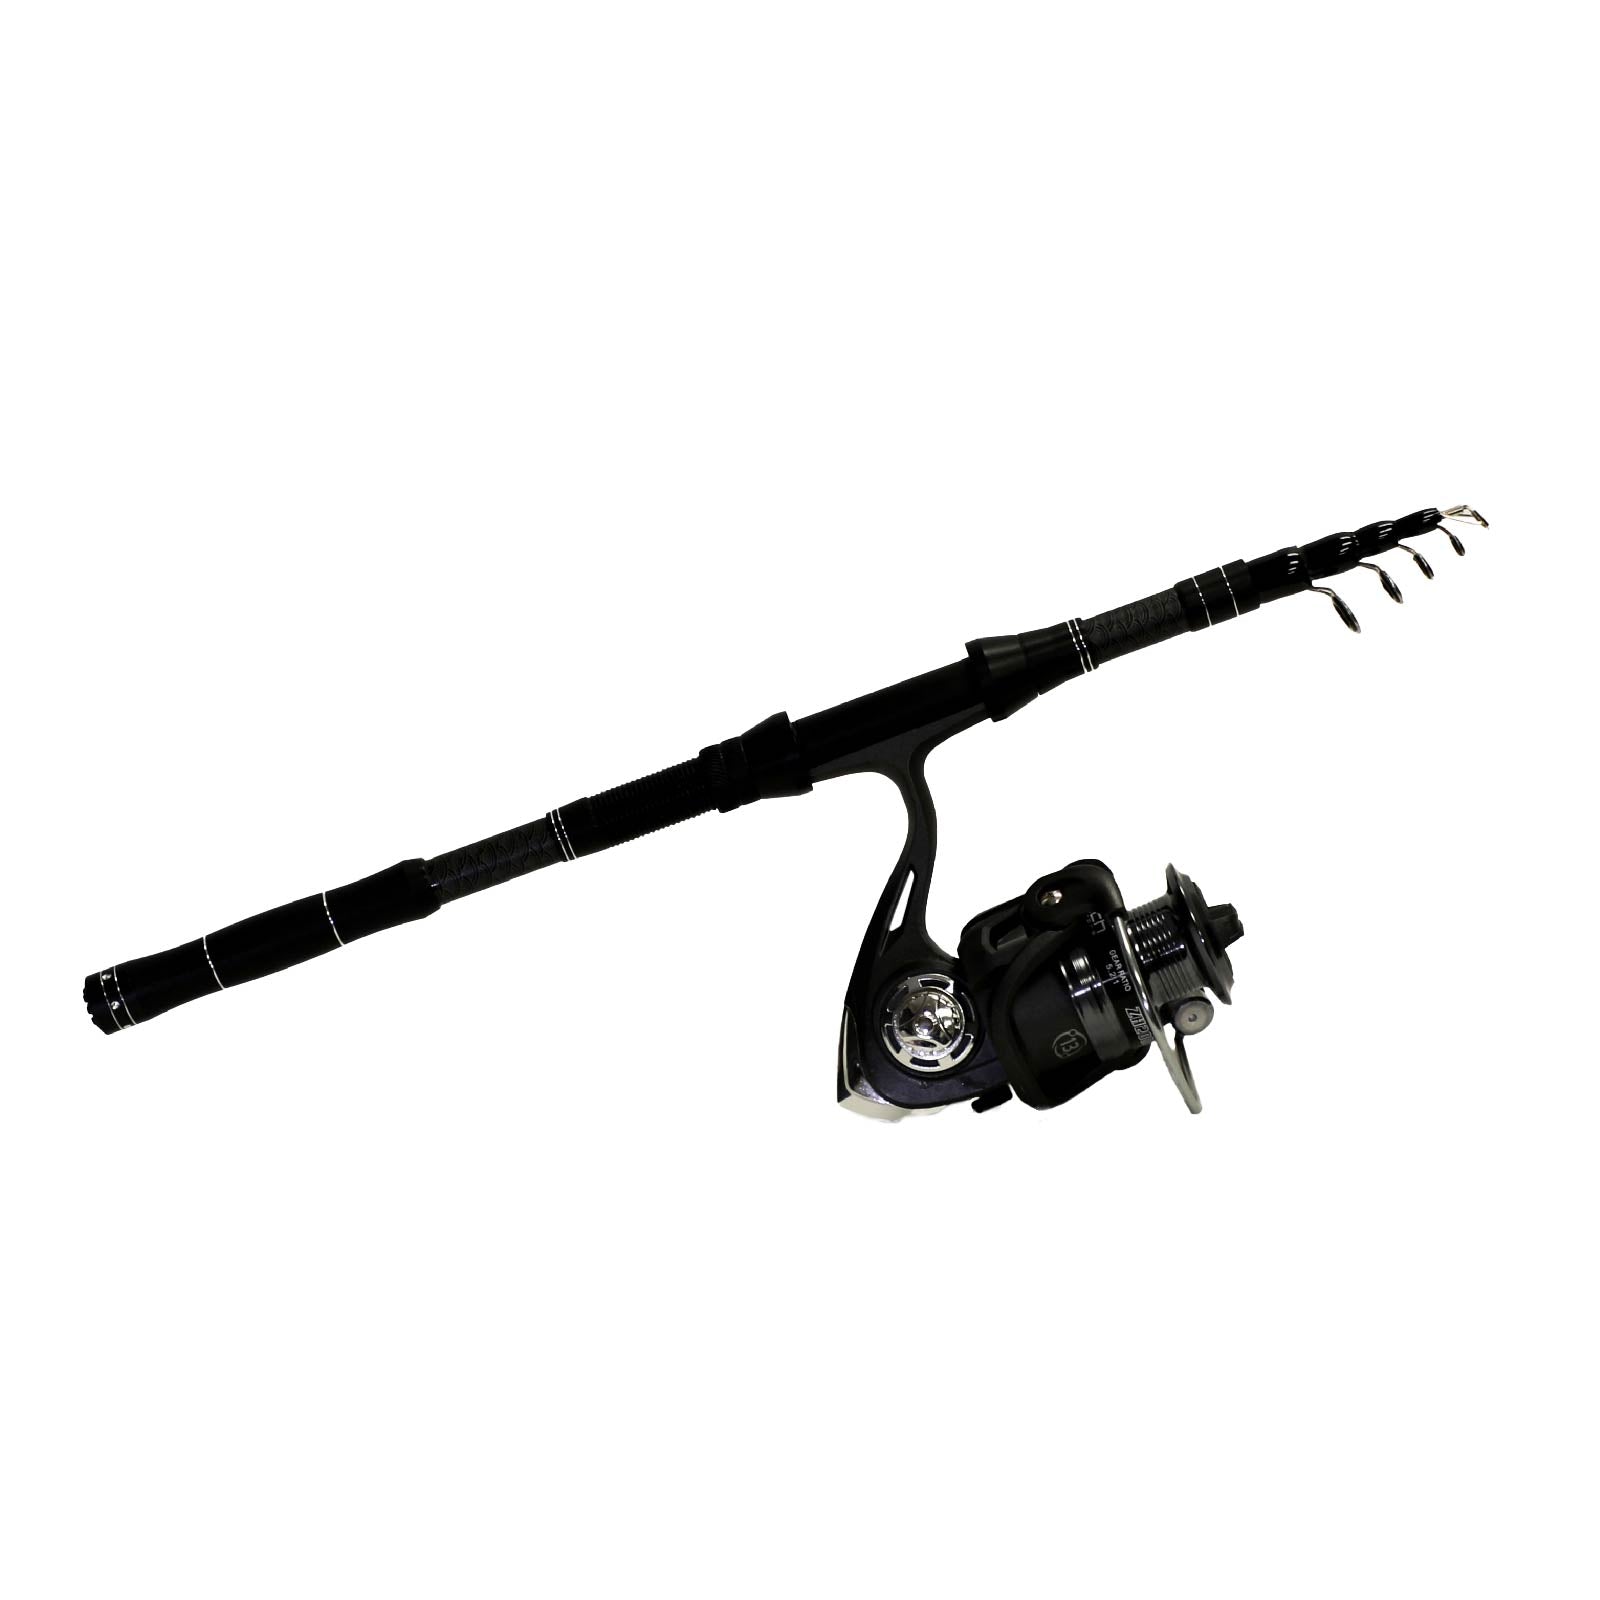 telescopic fishing pole, telescopic fishing pole Suppliers and  Manufacturers at